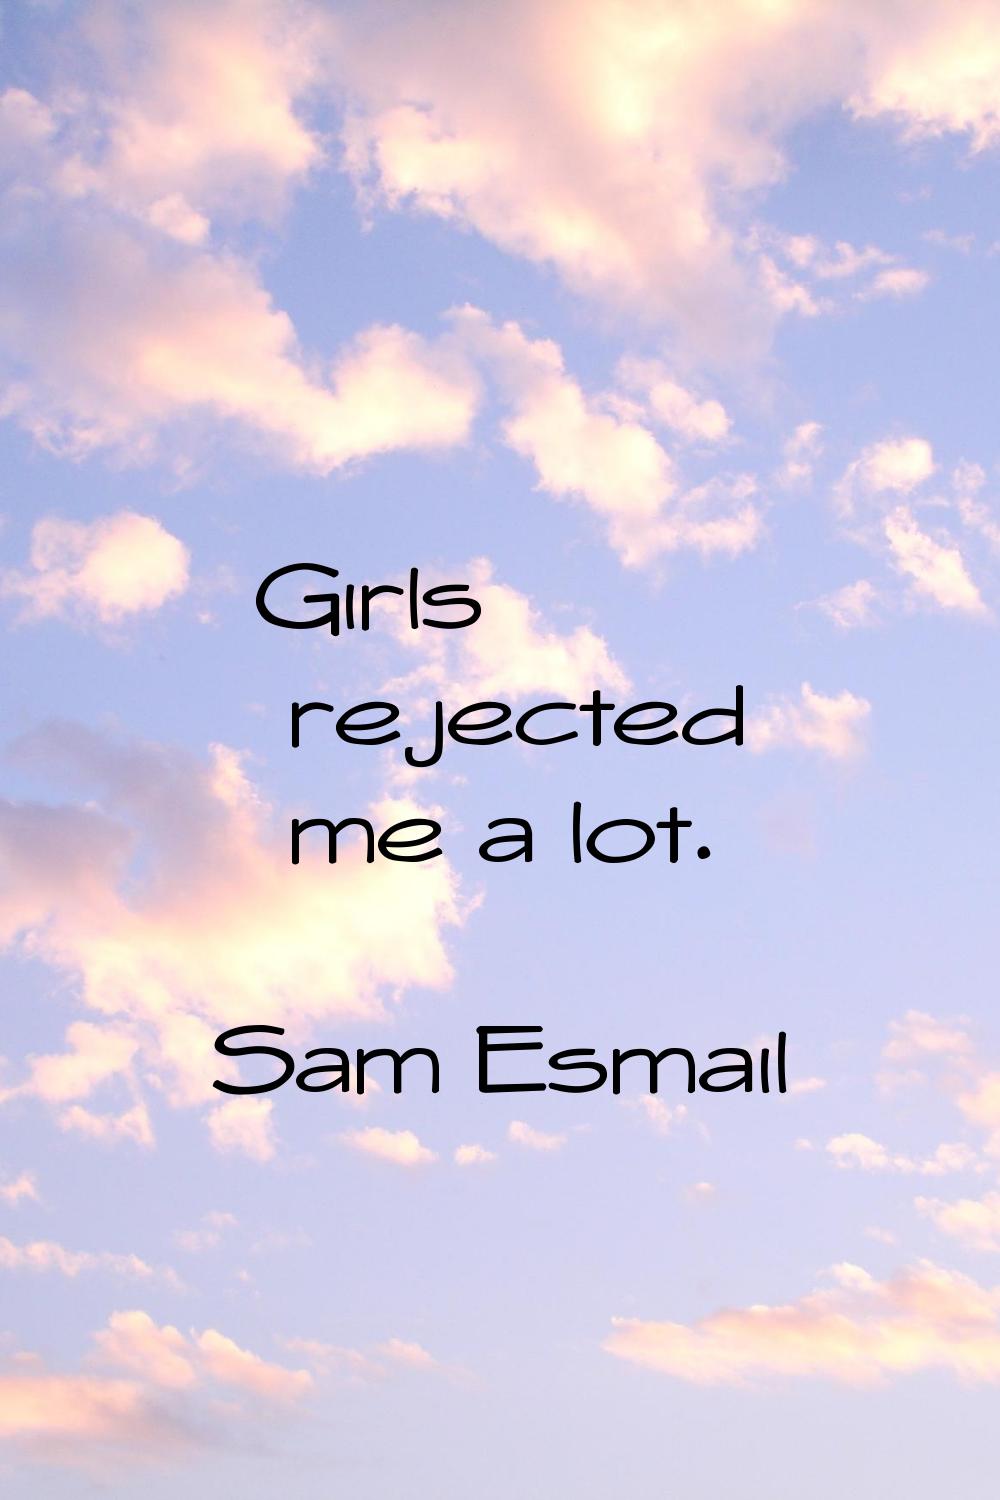 Girls rejected me a lot.